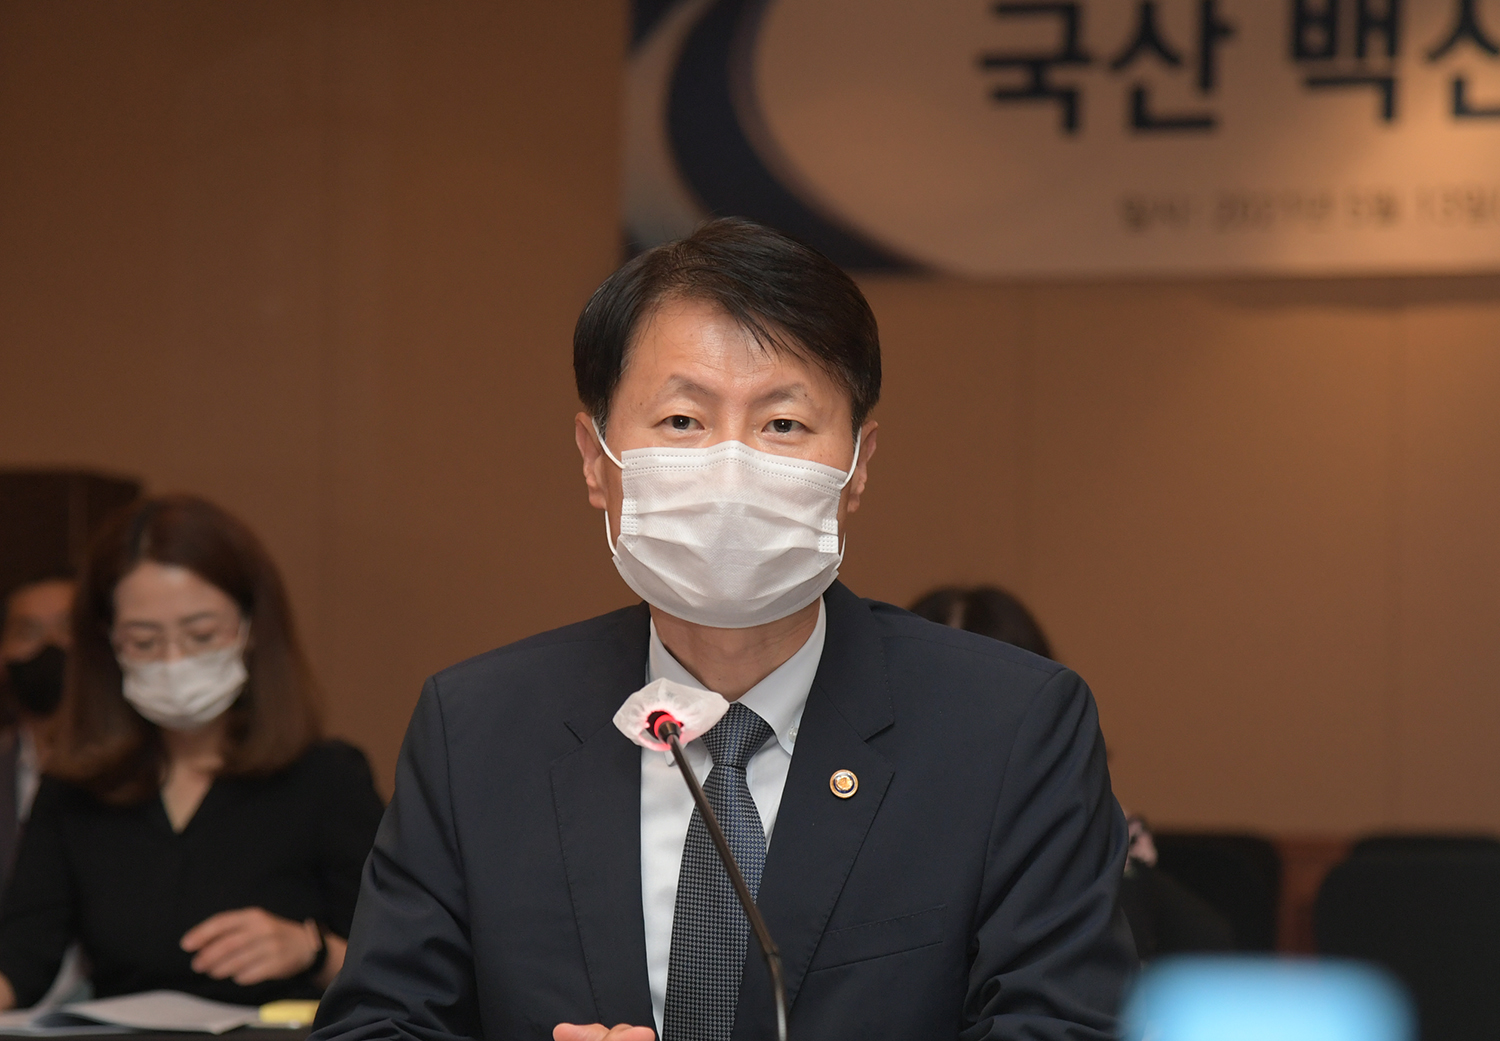 [May 13, 2021] Minister attends the Meeting to Support the Development of Homegrown Vaccines